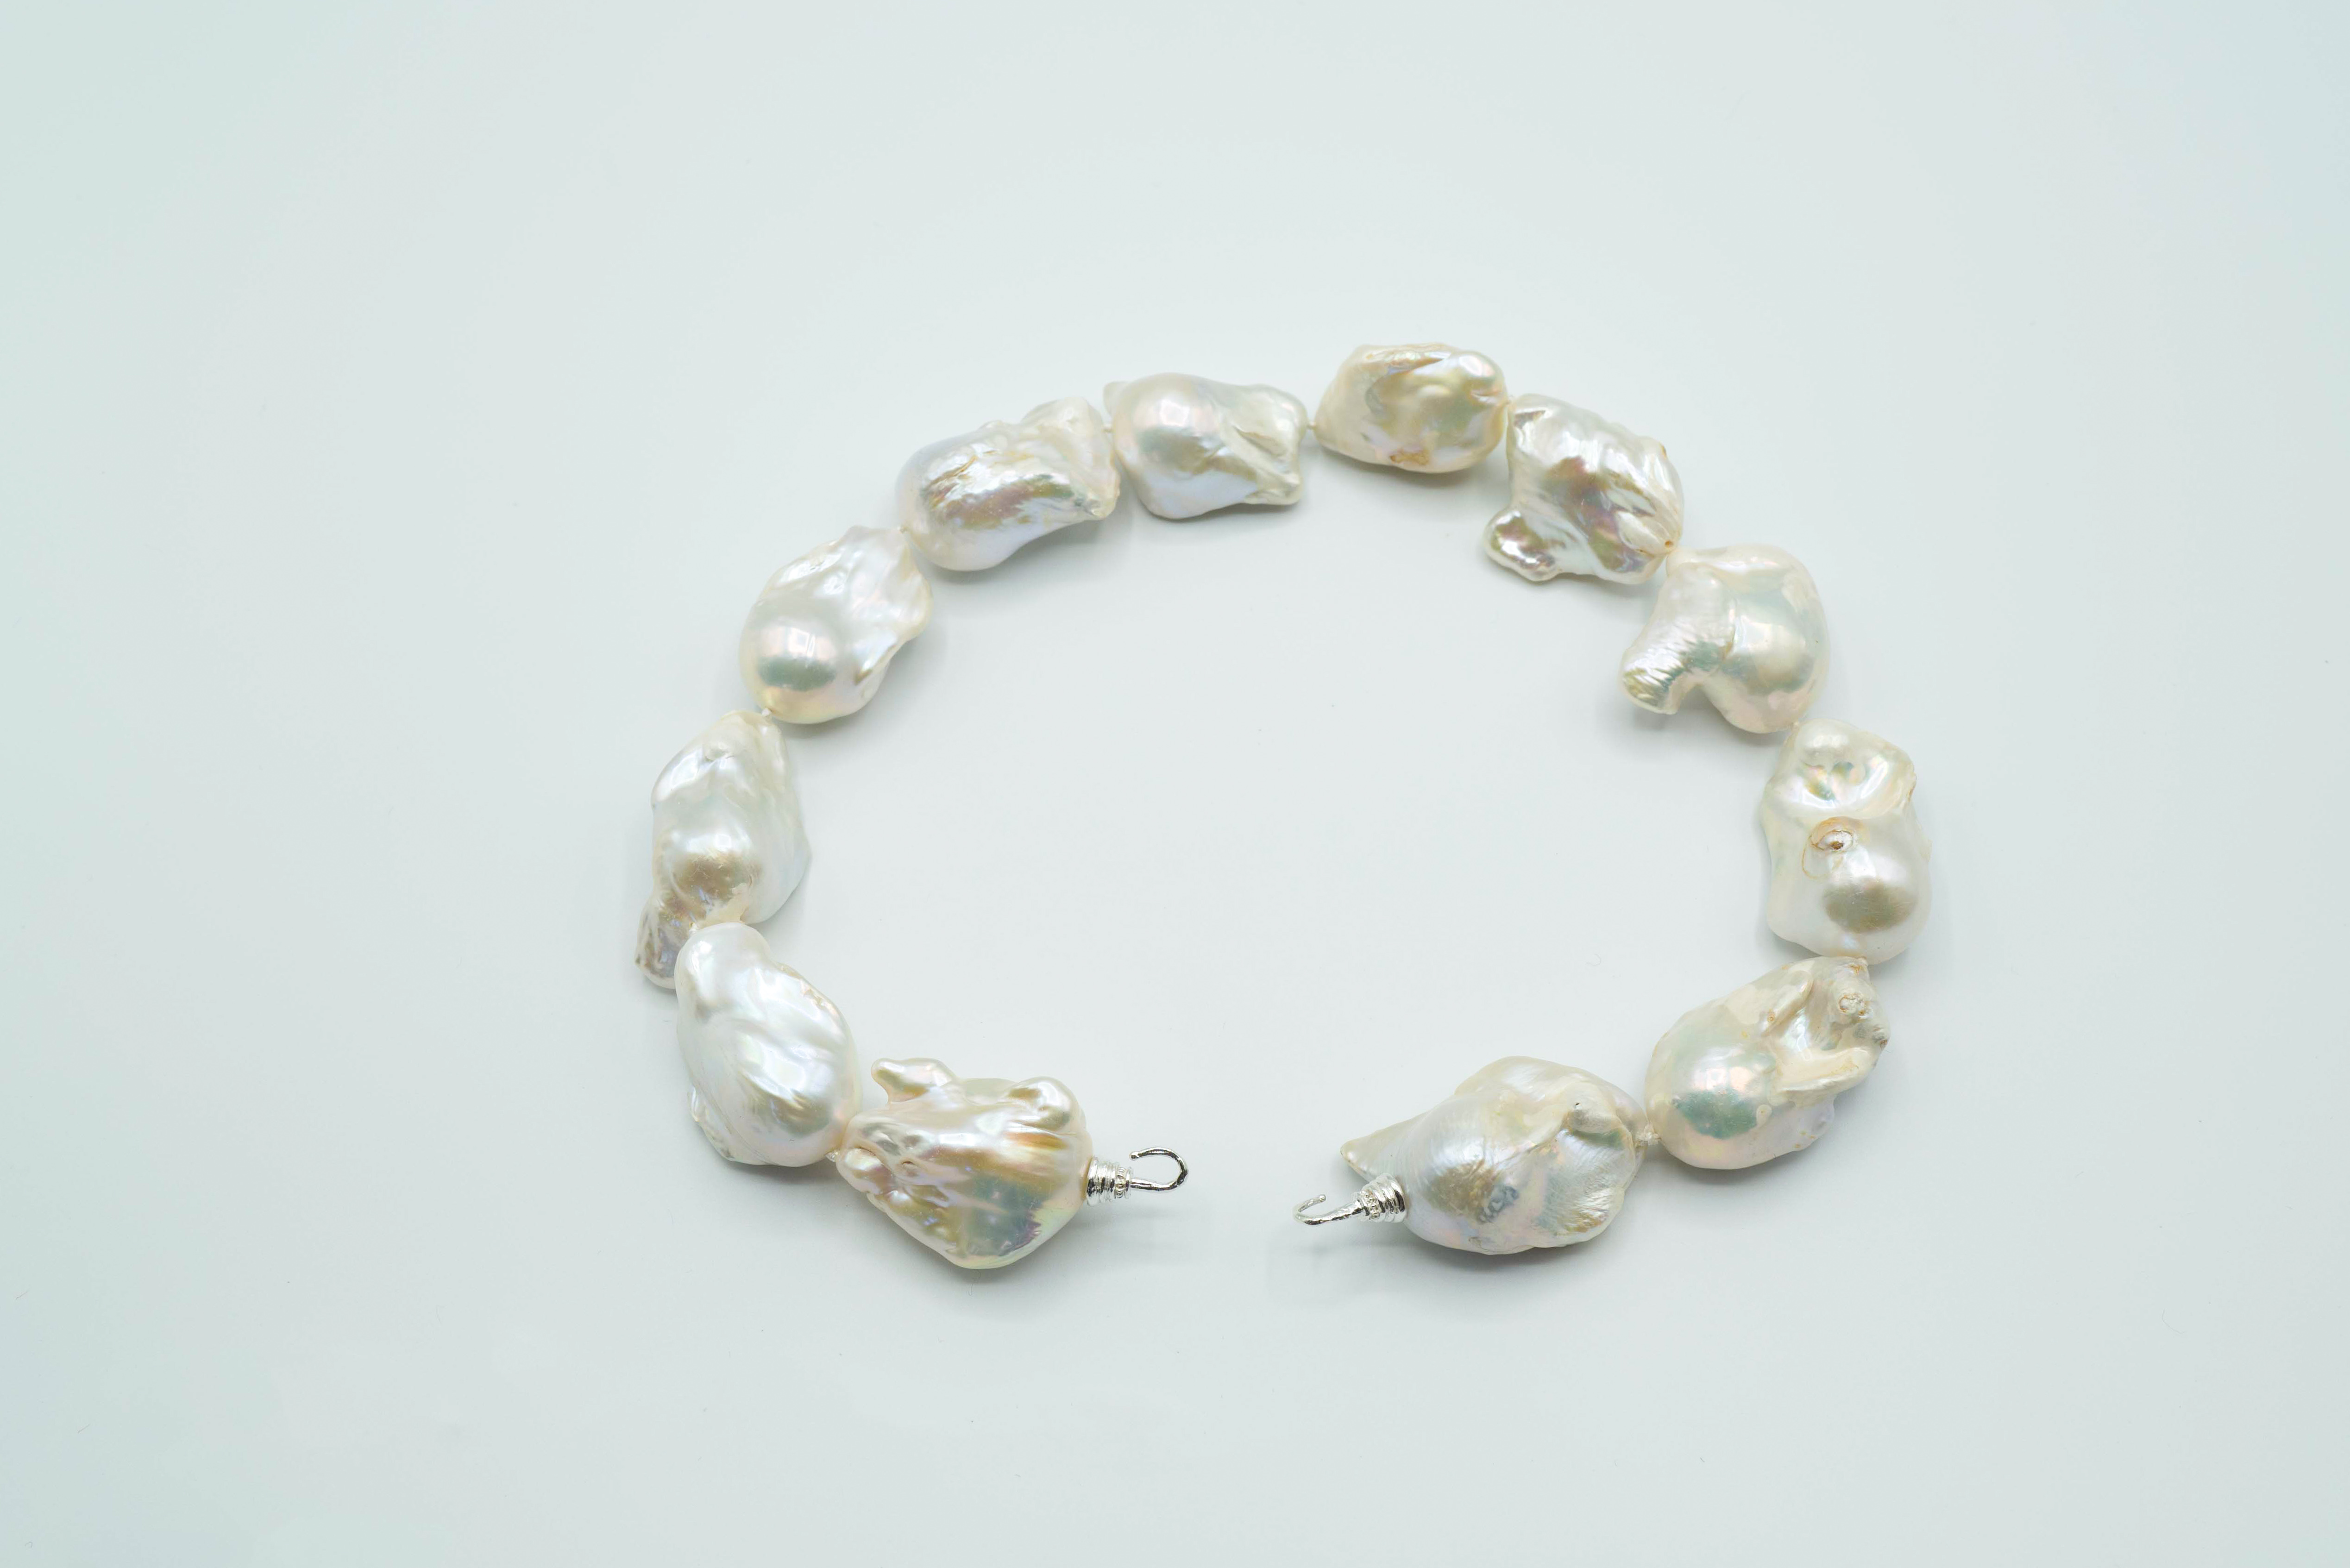 Giant Freshwater High Luster Drop Baroque Pearls with Hand Cast Brass Hooks Hand Knotted on Silk